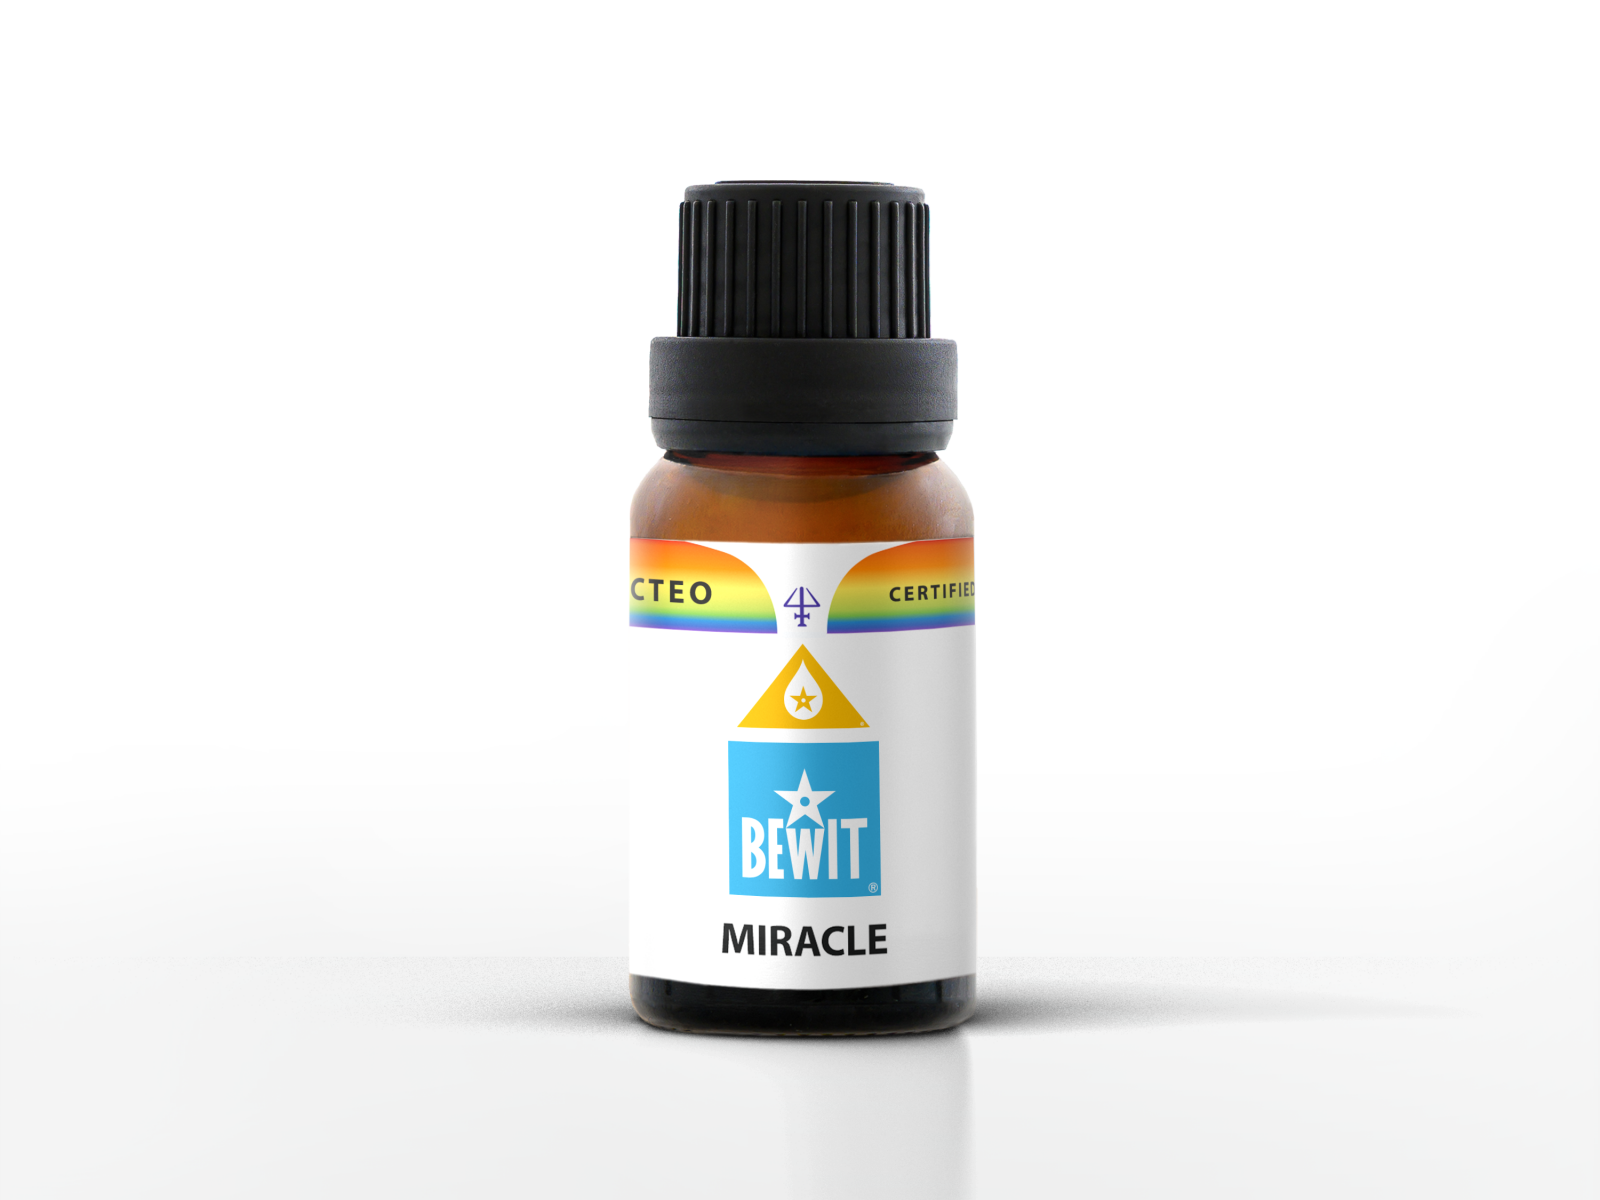 BEWIT MIRACLE - Blend of the essential oils, 15 ml